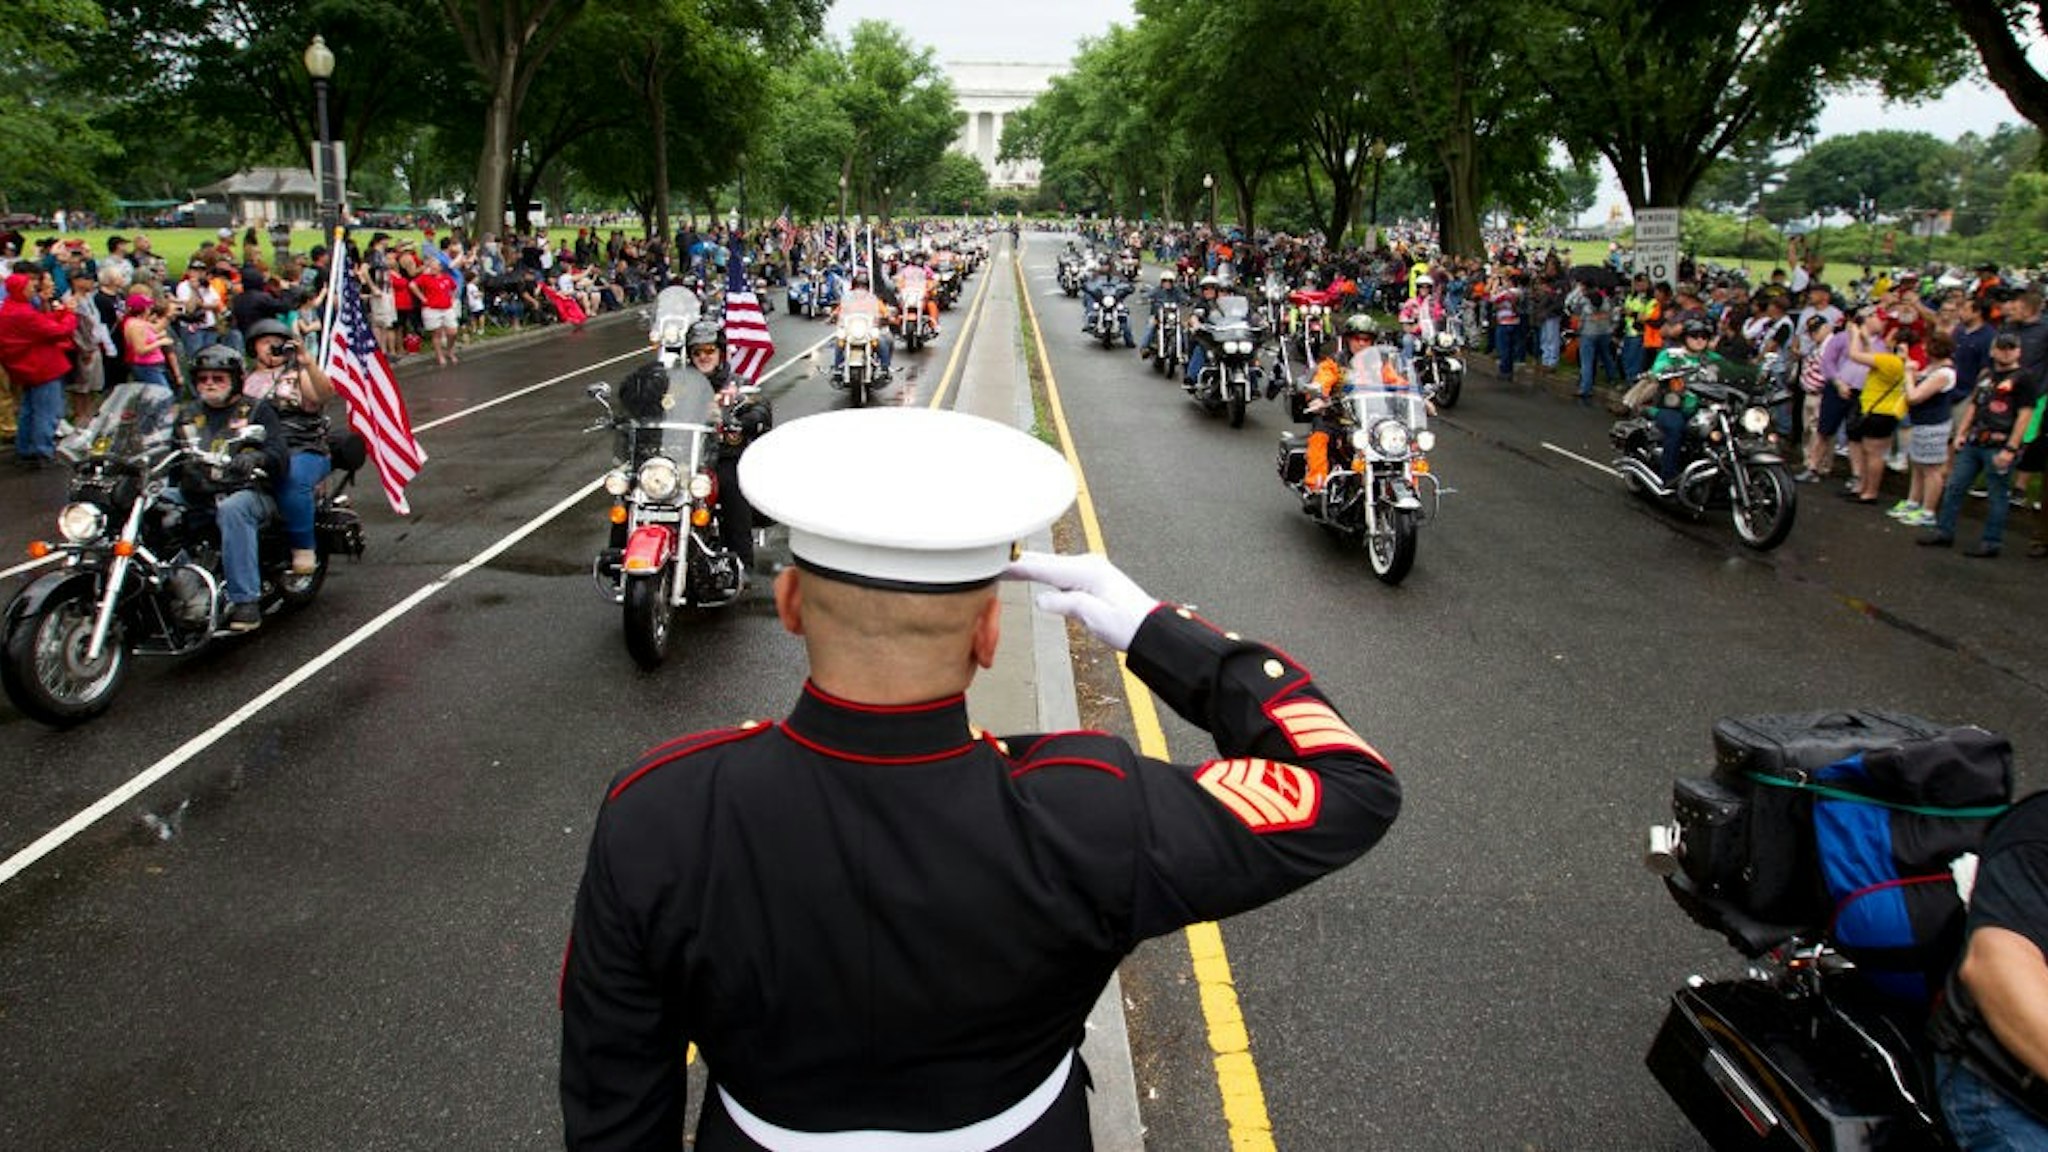 TOPSHOT - US Marine Tim Chambers salutes as participants in the Rolling Thunder annual motorcycle rally ride in Washington DC, on May 28, 2017. Motorcyclists are in Washington for the traditional annual Rolling Thunder ahead of Memorial Day, May 29. / AFP PHOTO / Jose Luis Magana (Photo credit should read